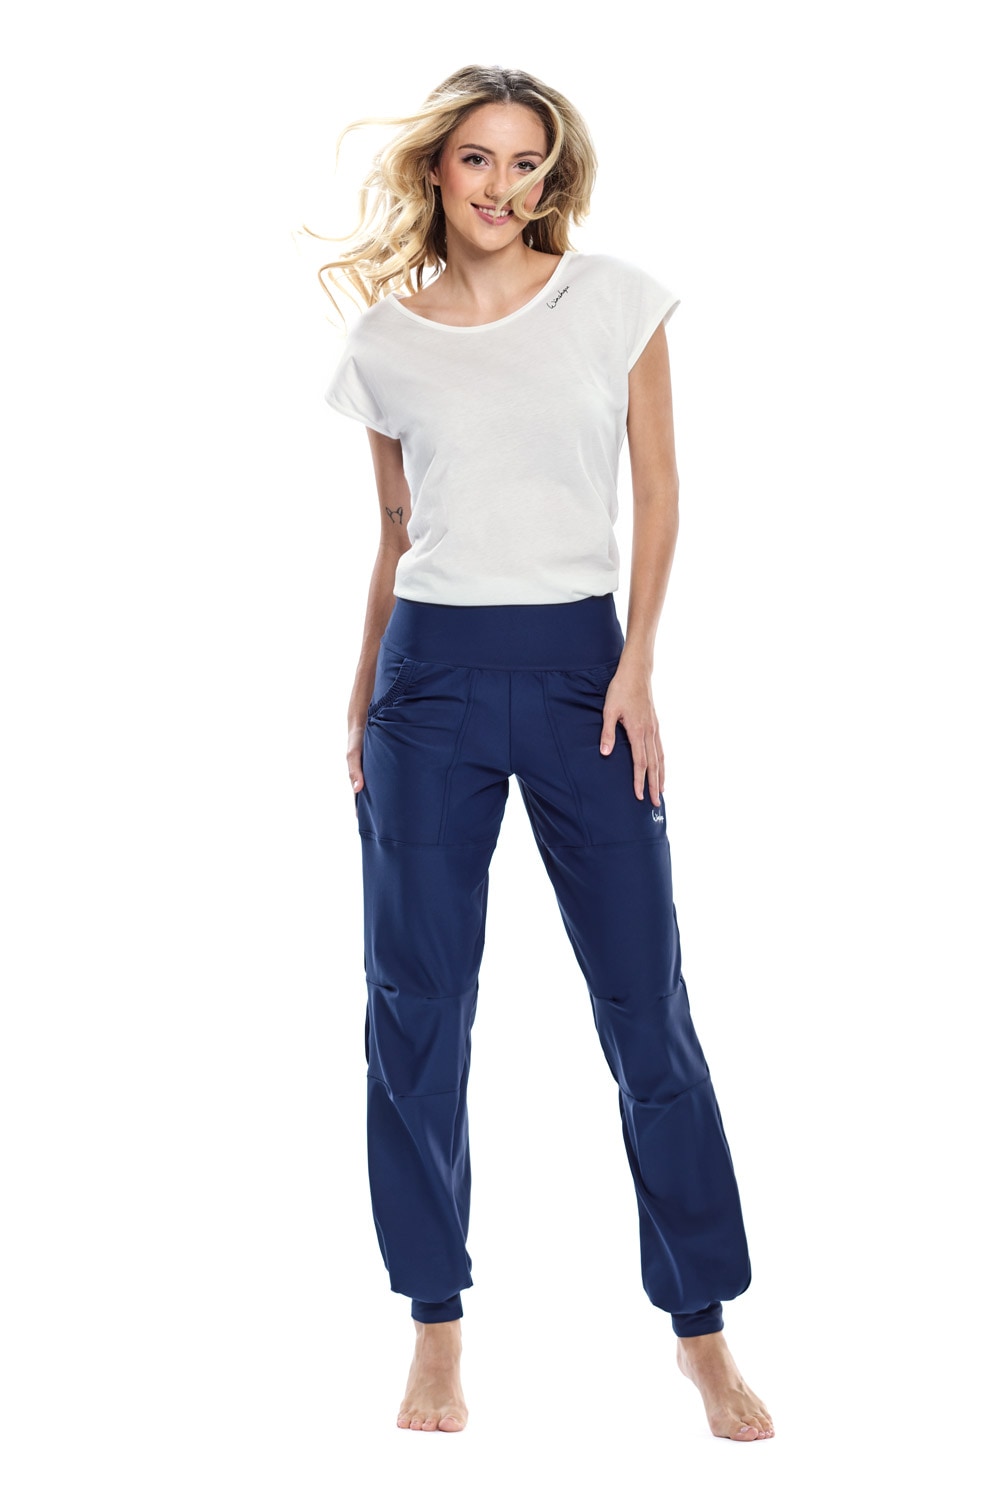 LEI101C«, bei online Sporthose »Functional Time OTTO Leisure Trousers Waist Comfort Winshape High